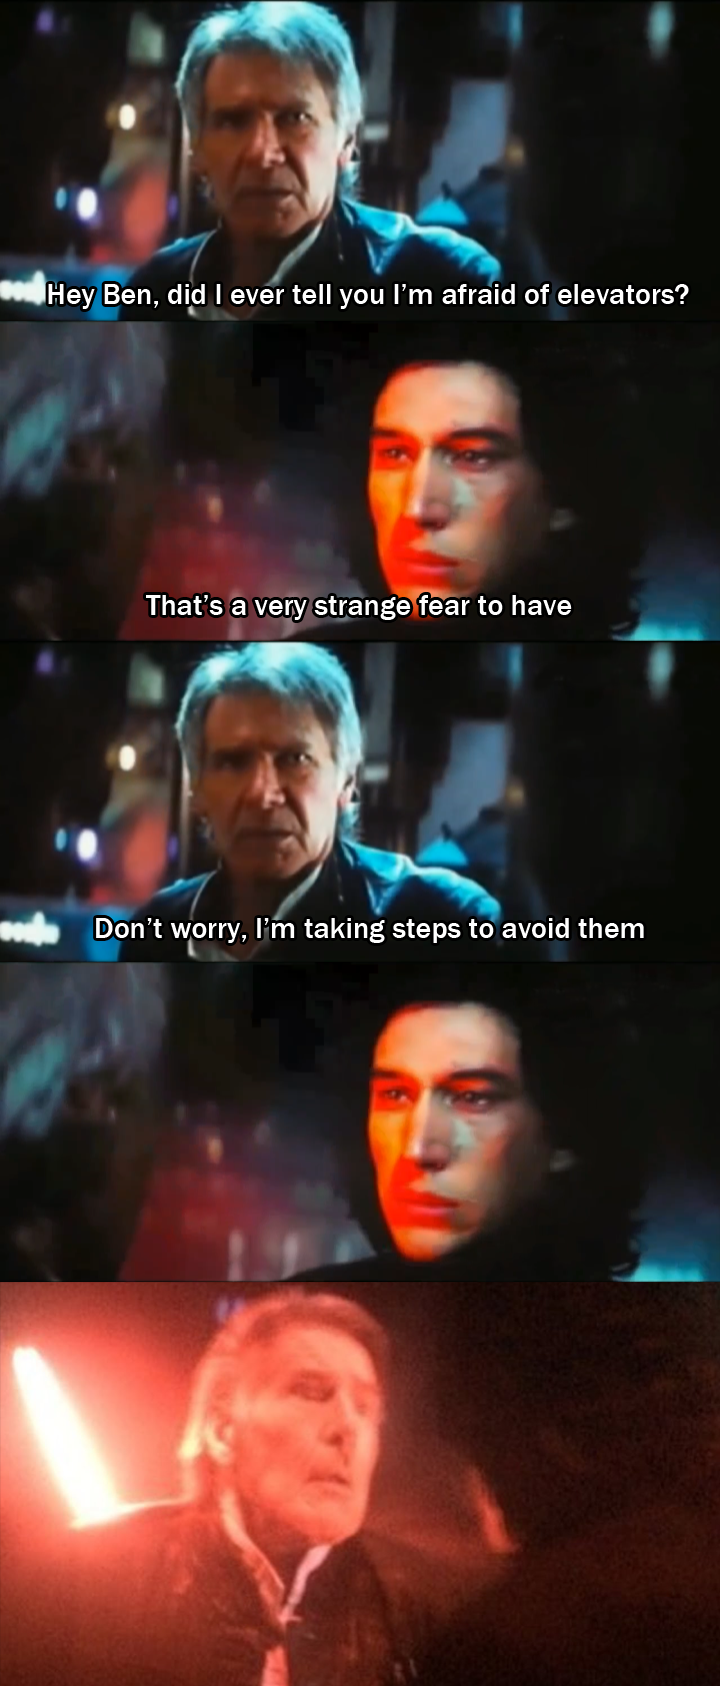 han shot first meme - Hey Ben, did I ever tell you I'm afraid of elevators? That's a very strange fear to have Don't worry, I'm taking steps to avoid them